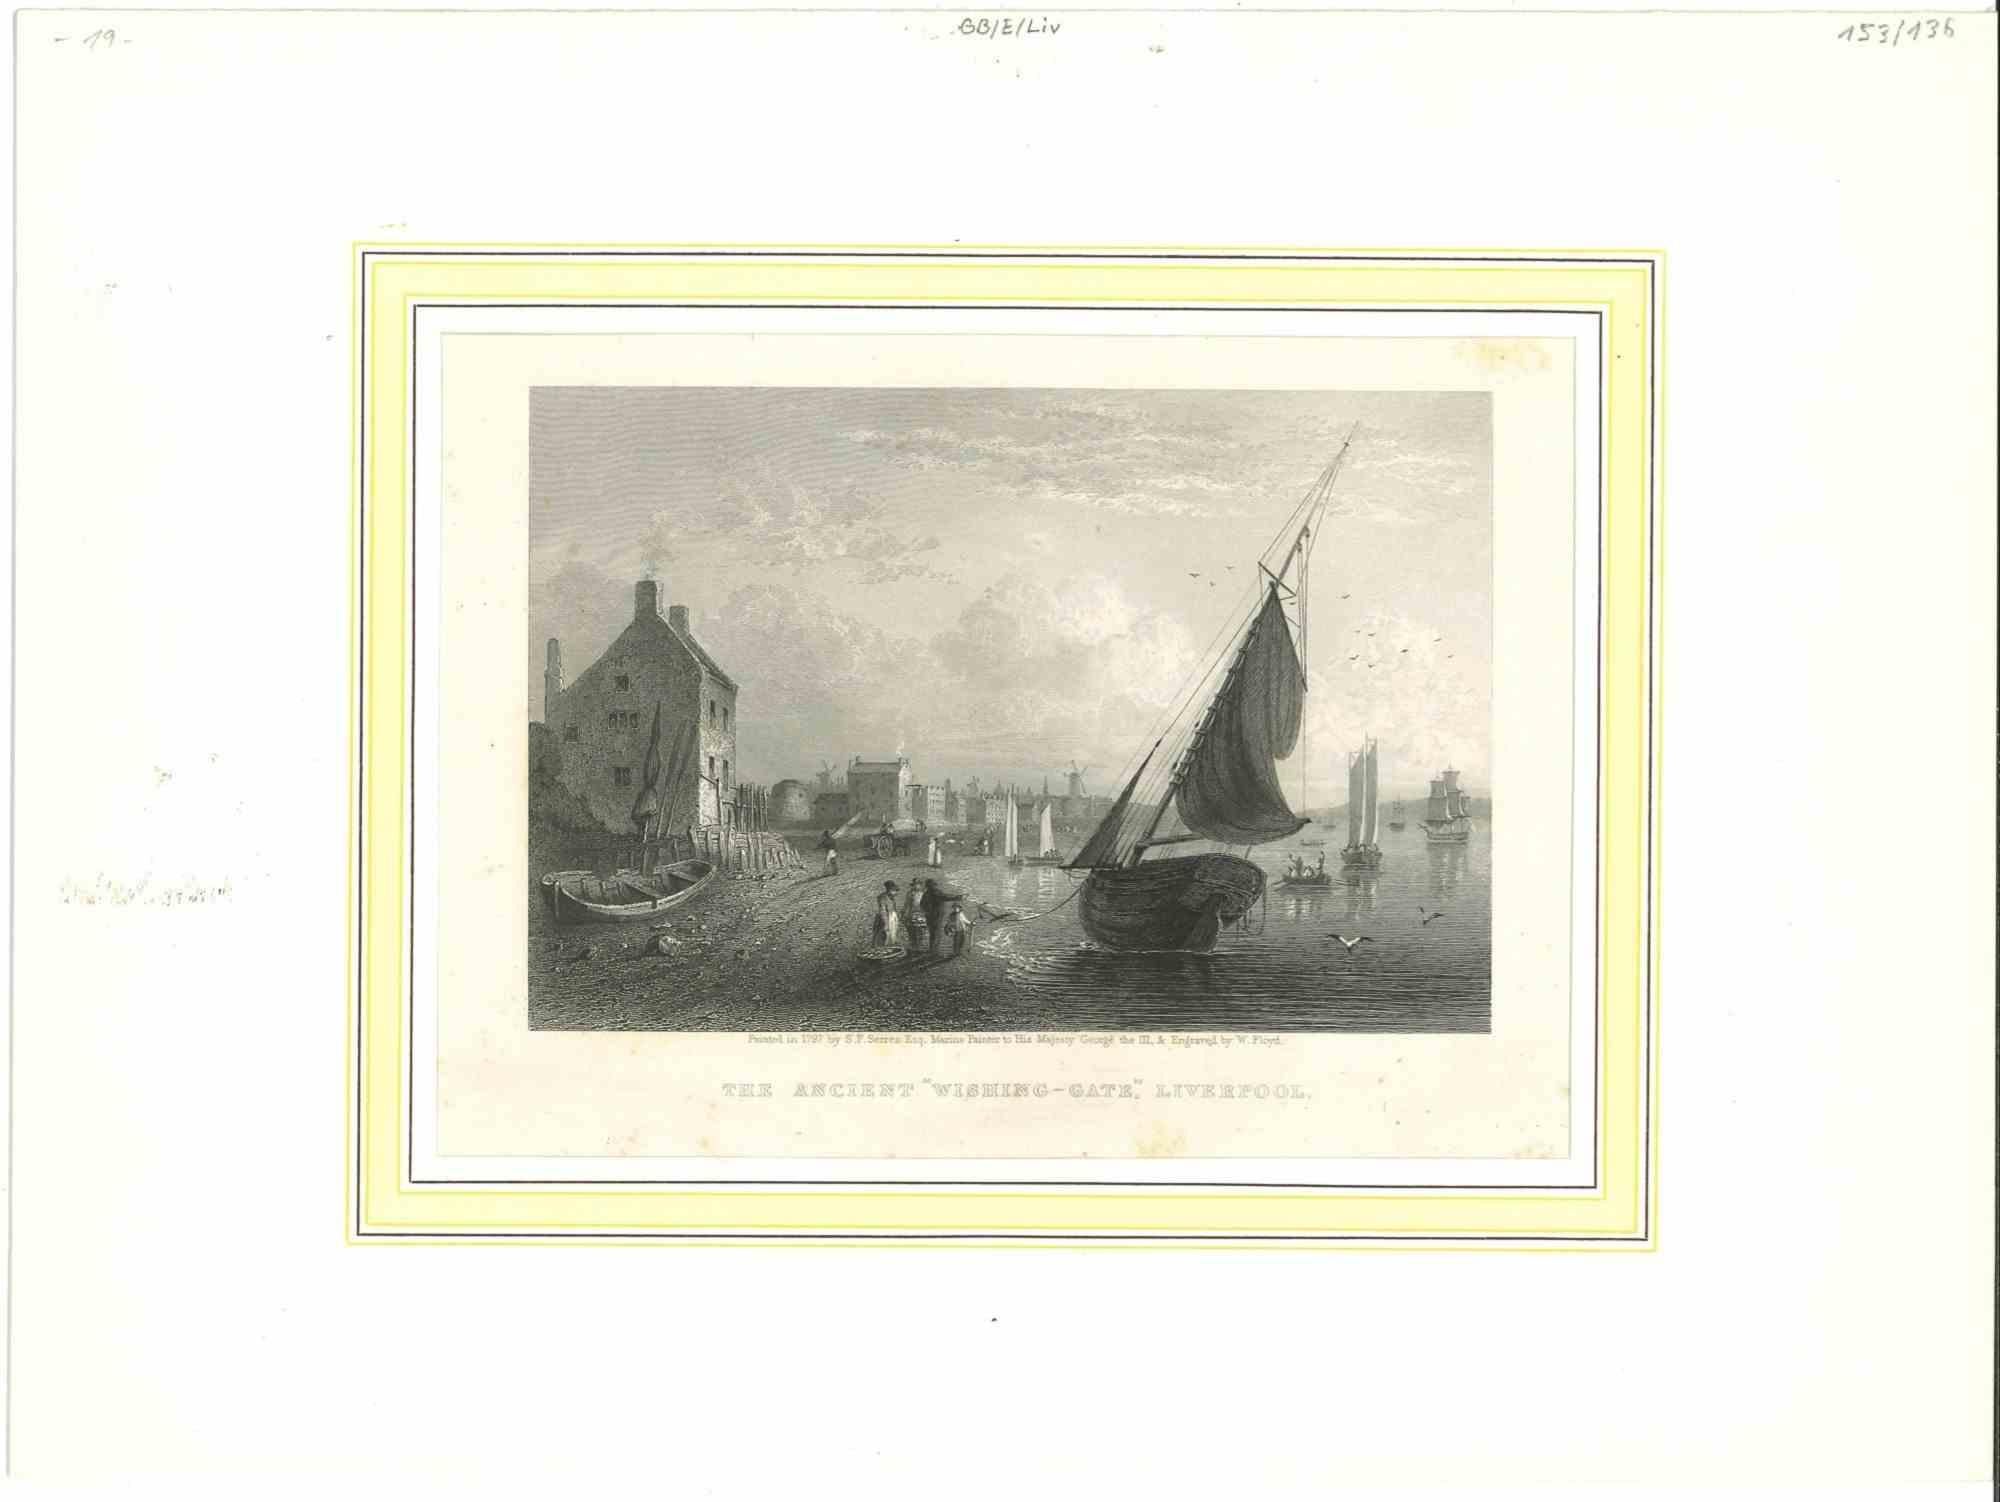 Unknown Landscape Print - The Ancient "Wishing-Gate" - Original Lithograph - Mid-19th Cent